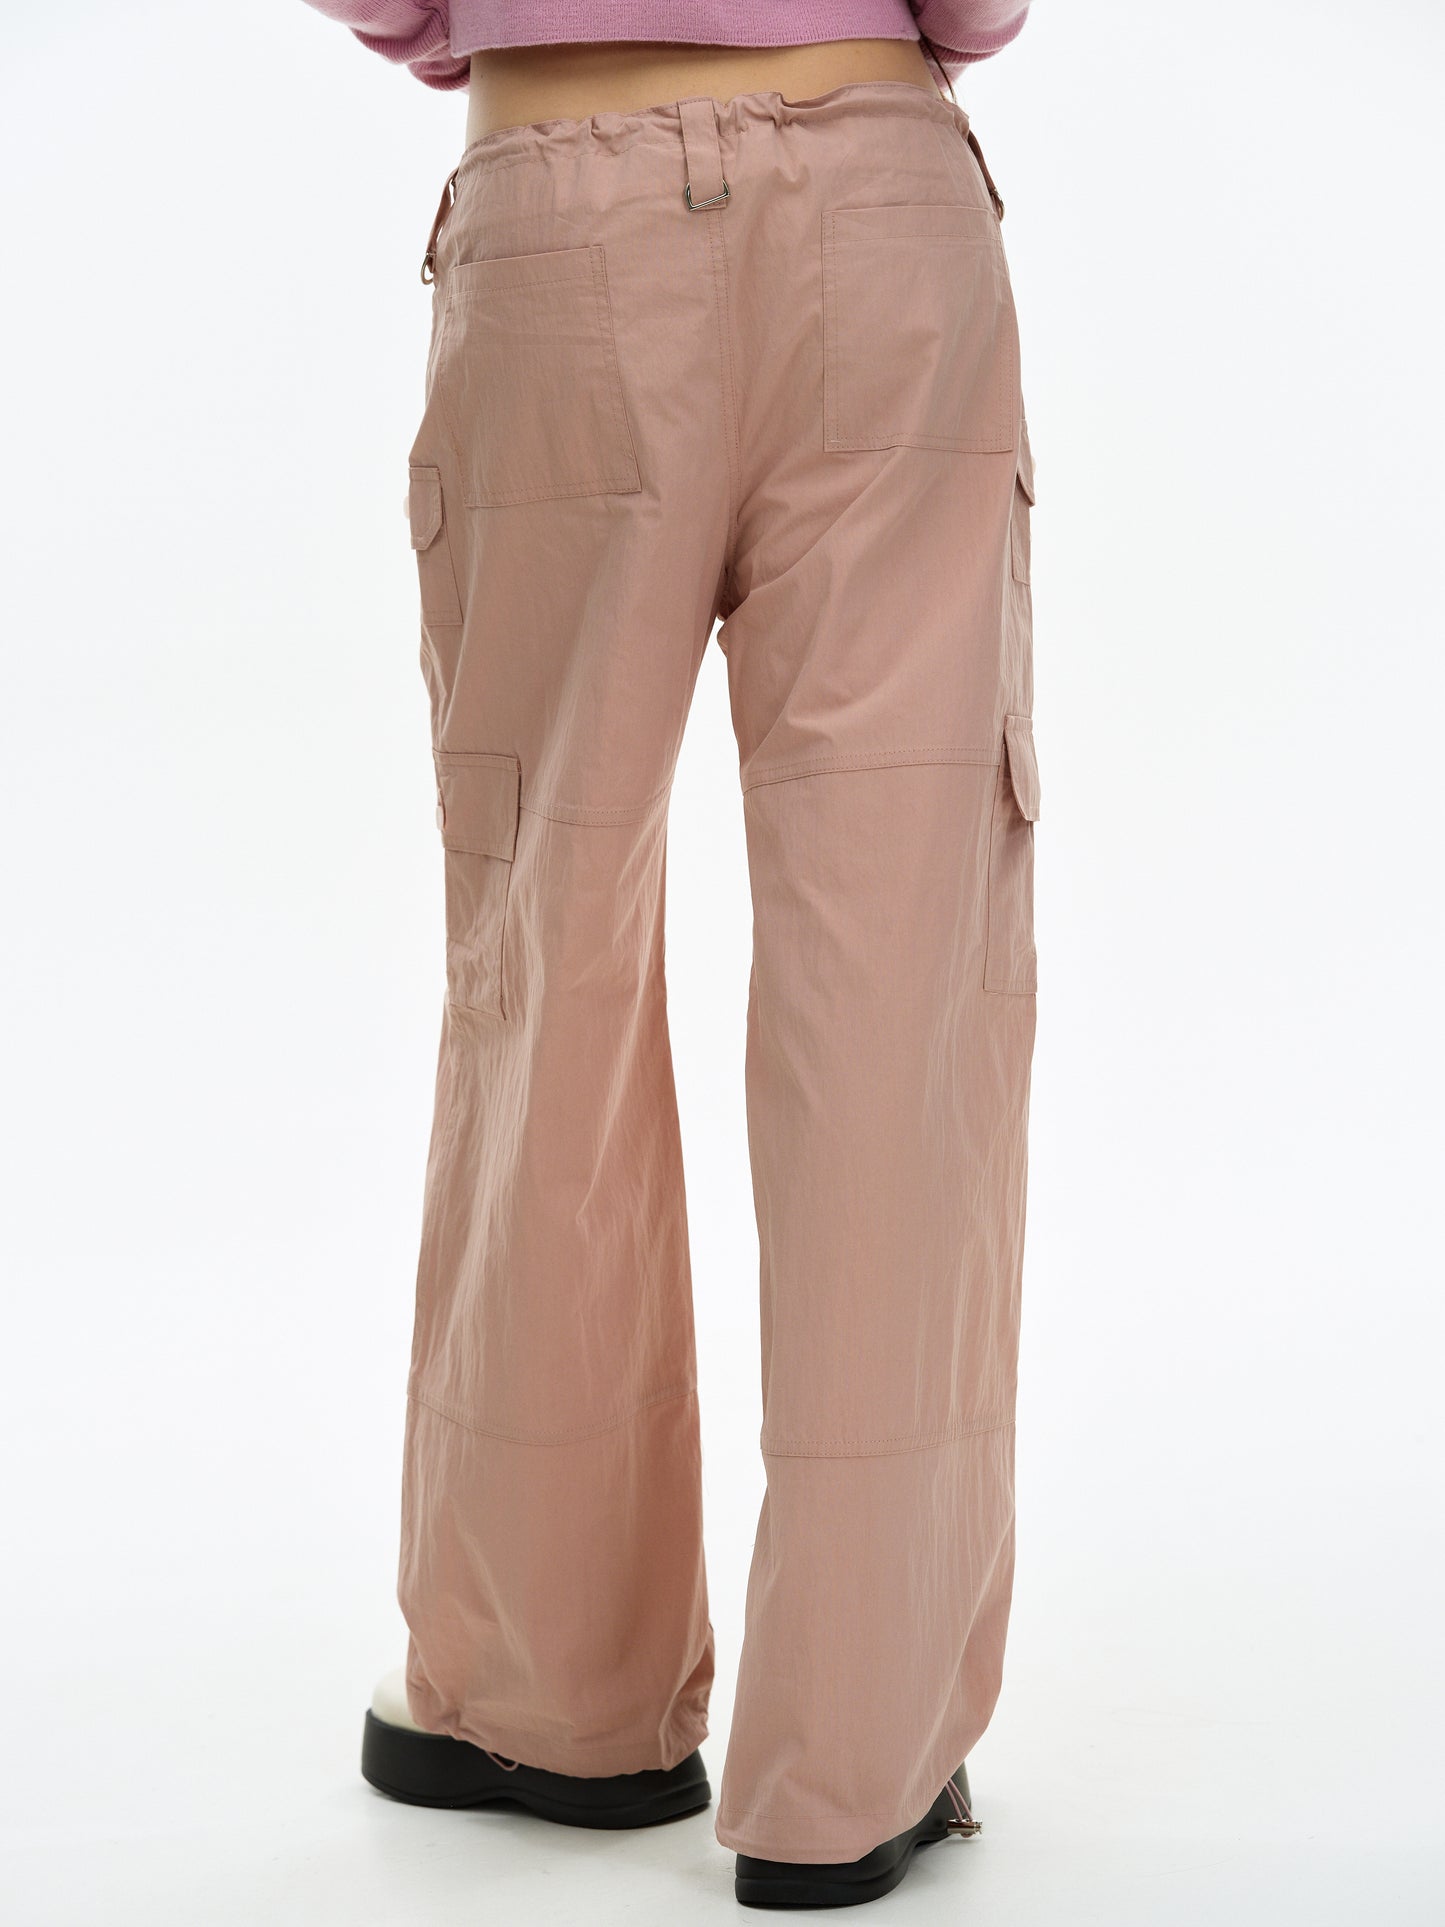 Parachute Cargo Trousers, Dusty Pink